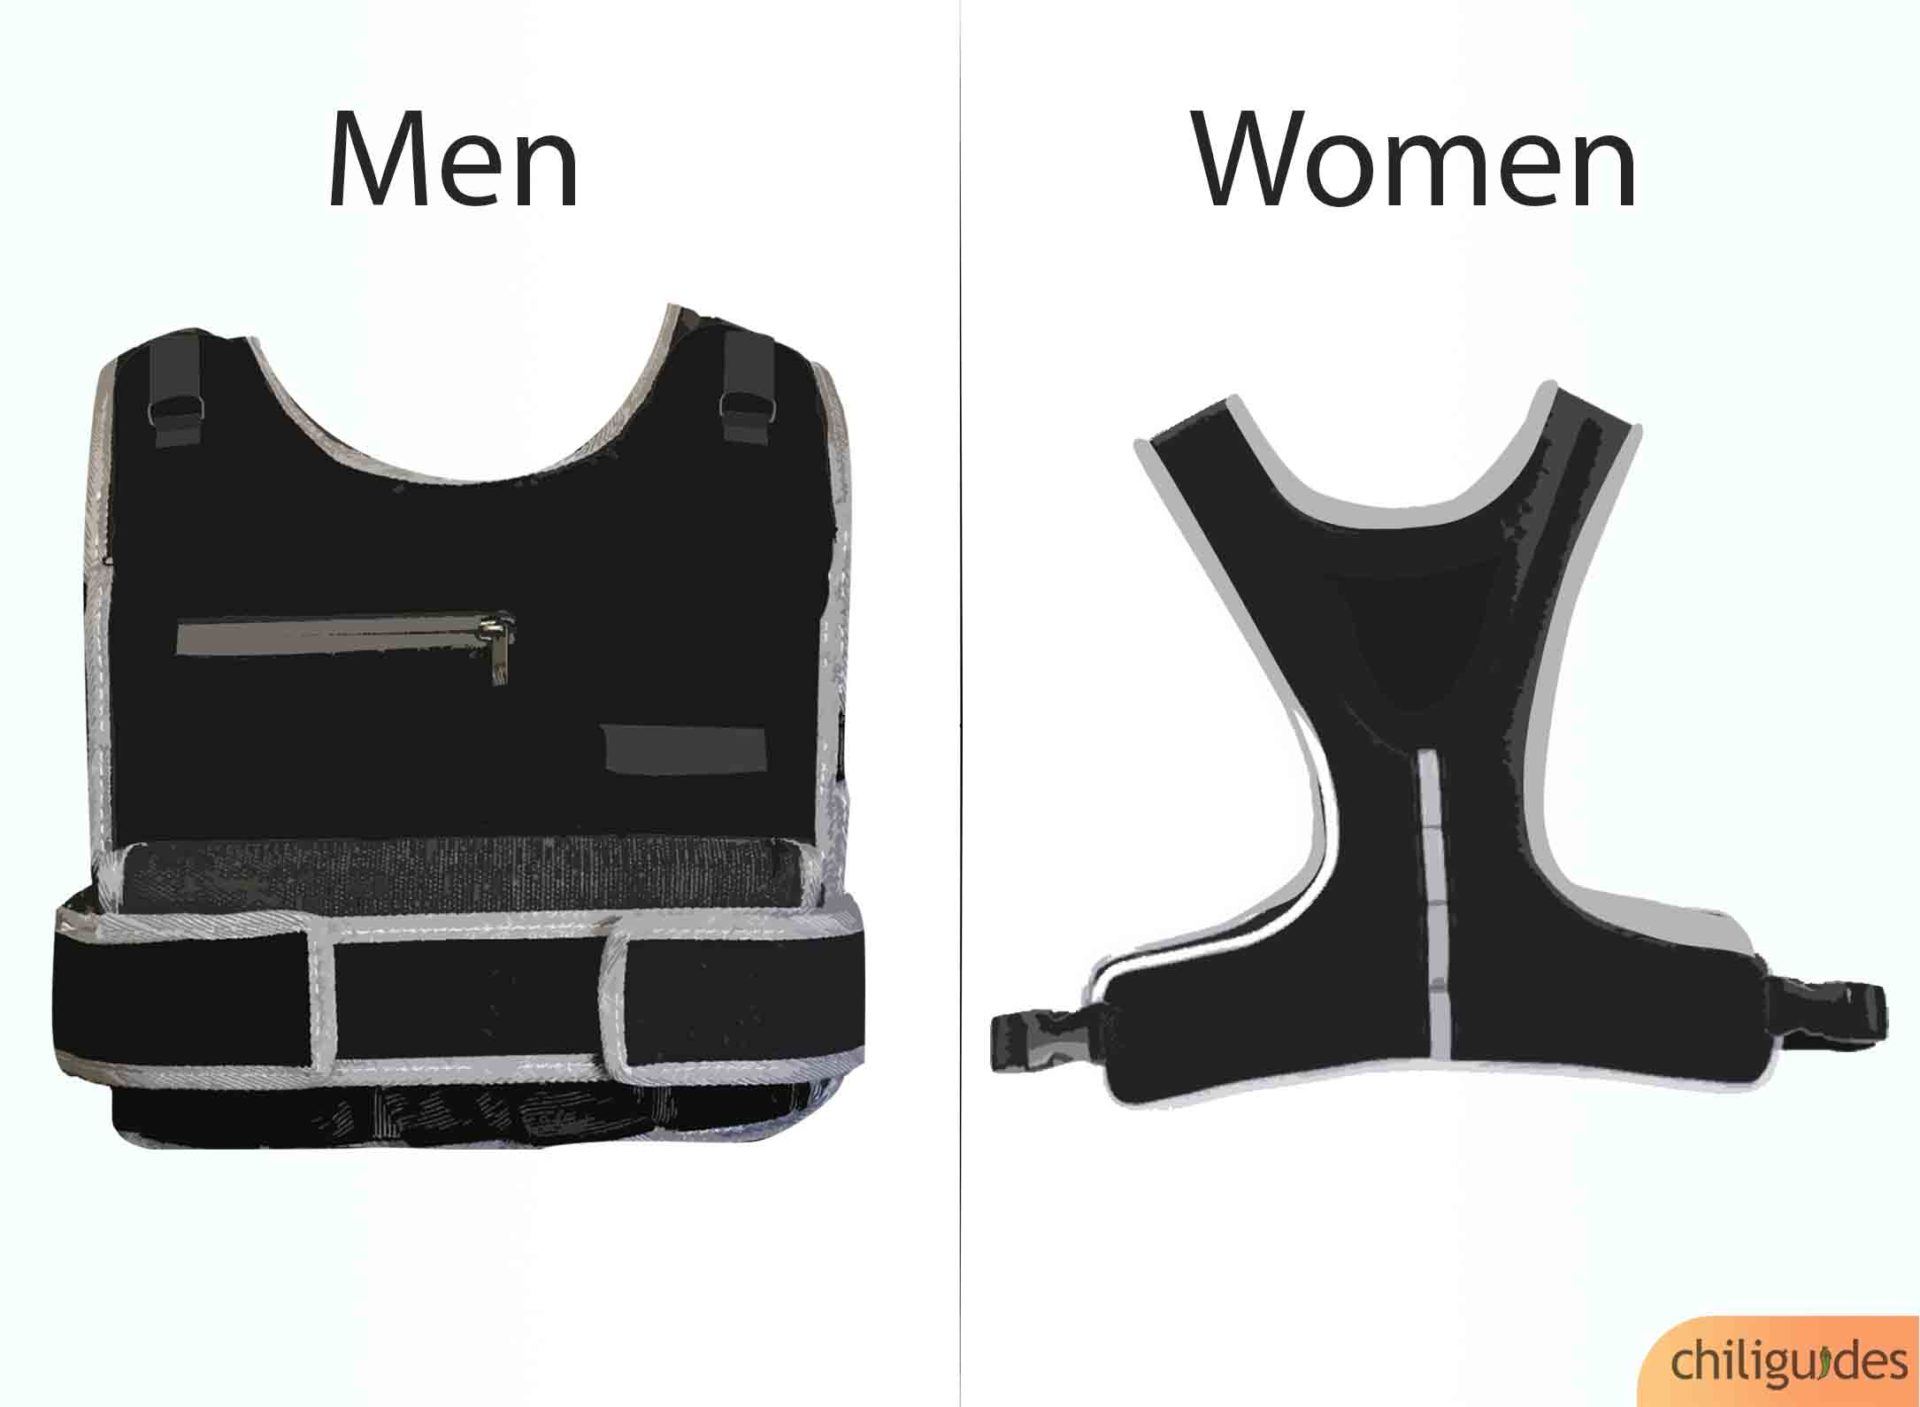 Choose the right vest for your gender.